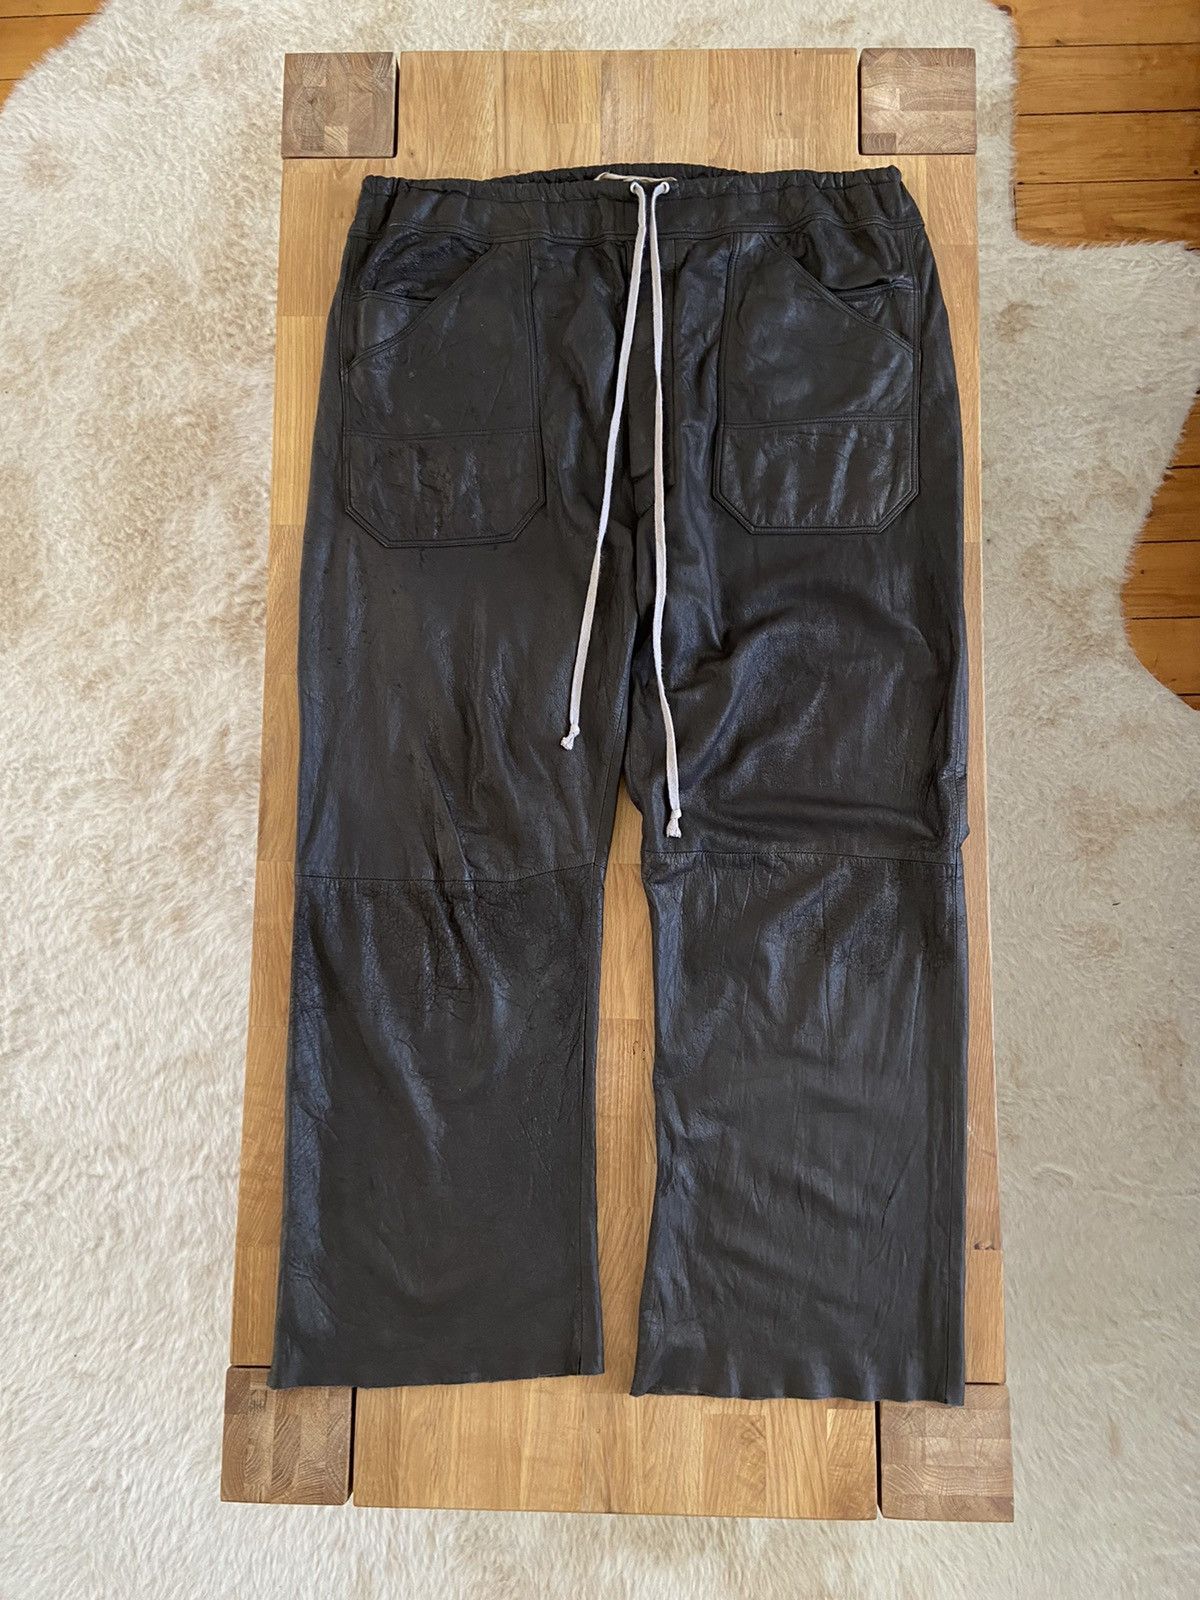 Rick Owens Rick Owens AW02 Sparrow Wide Leather Pants | Grailed